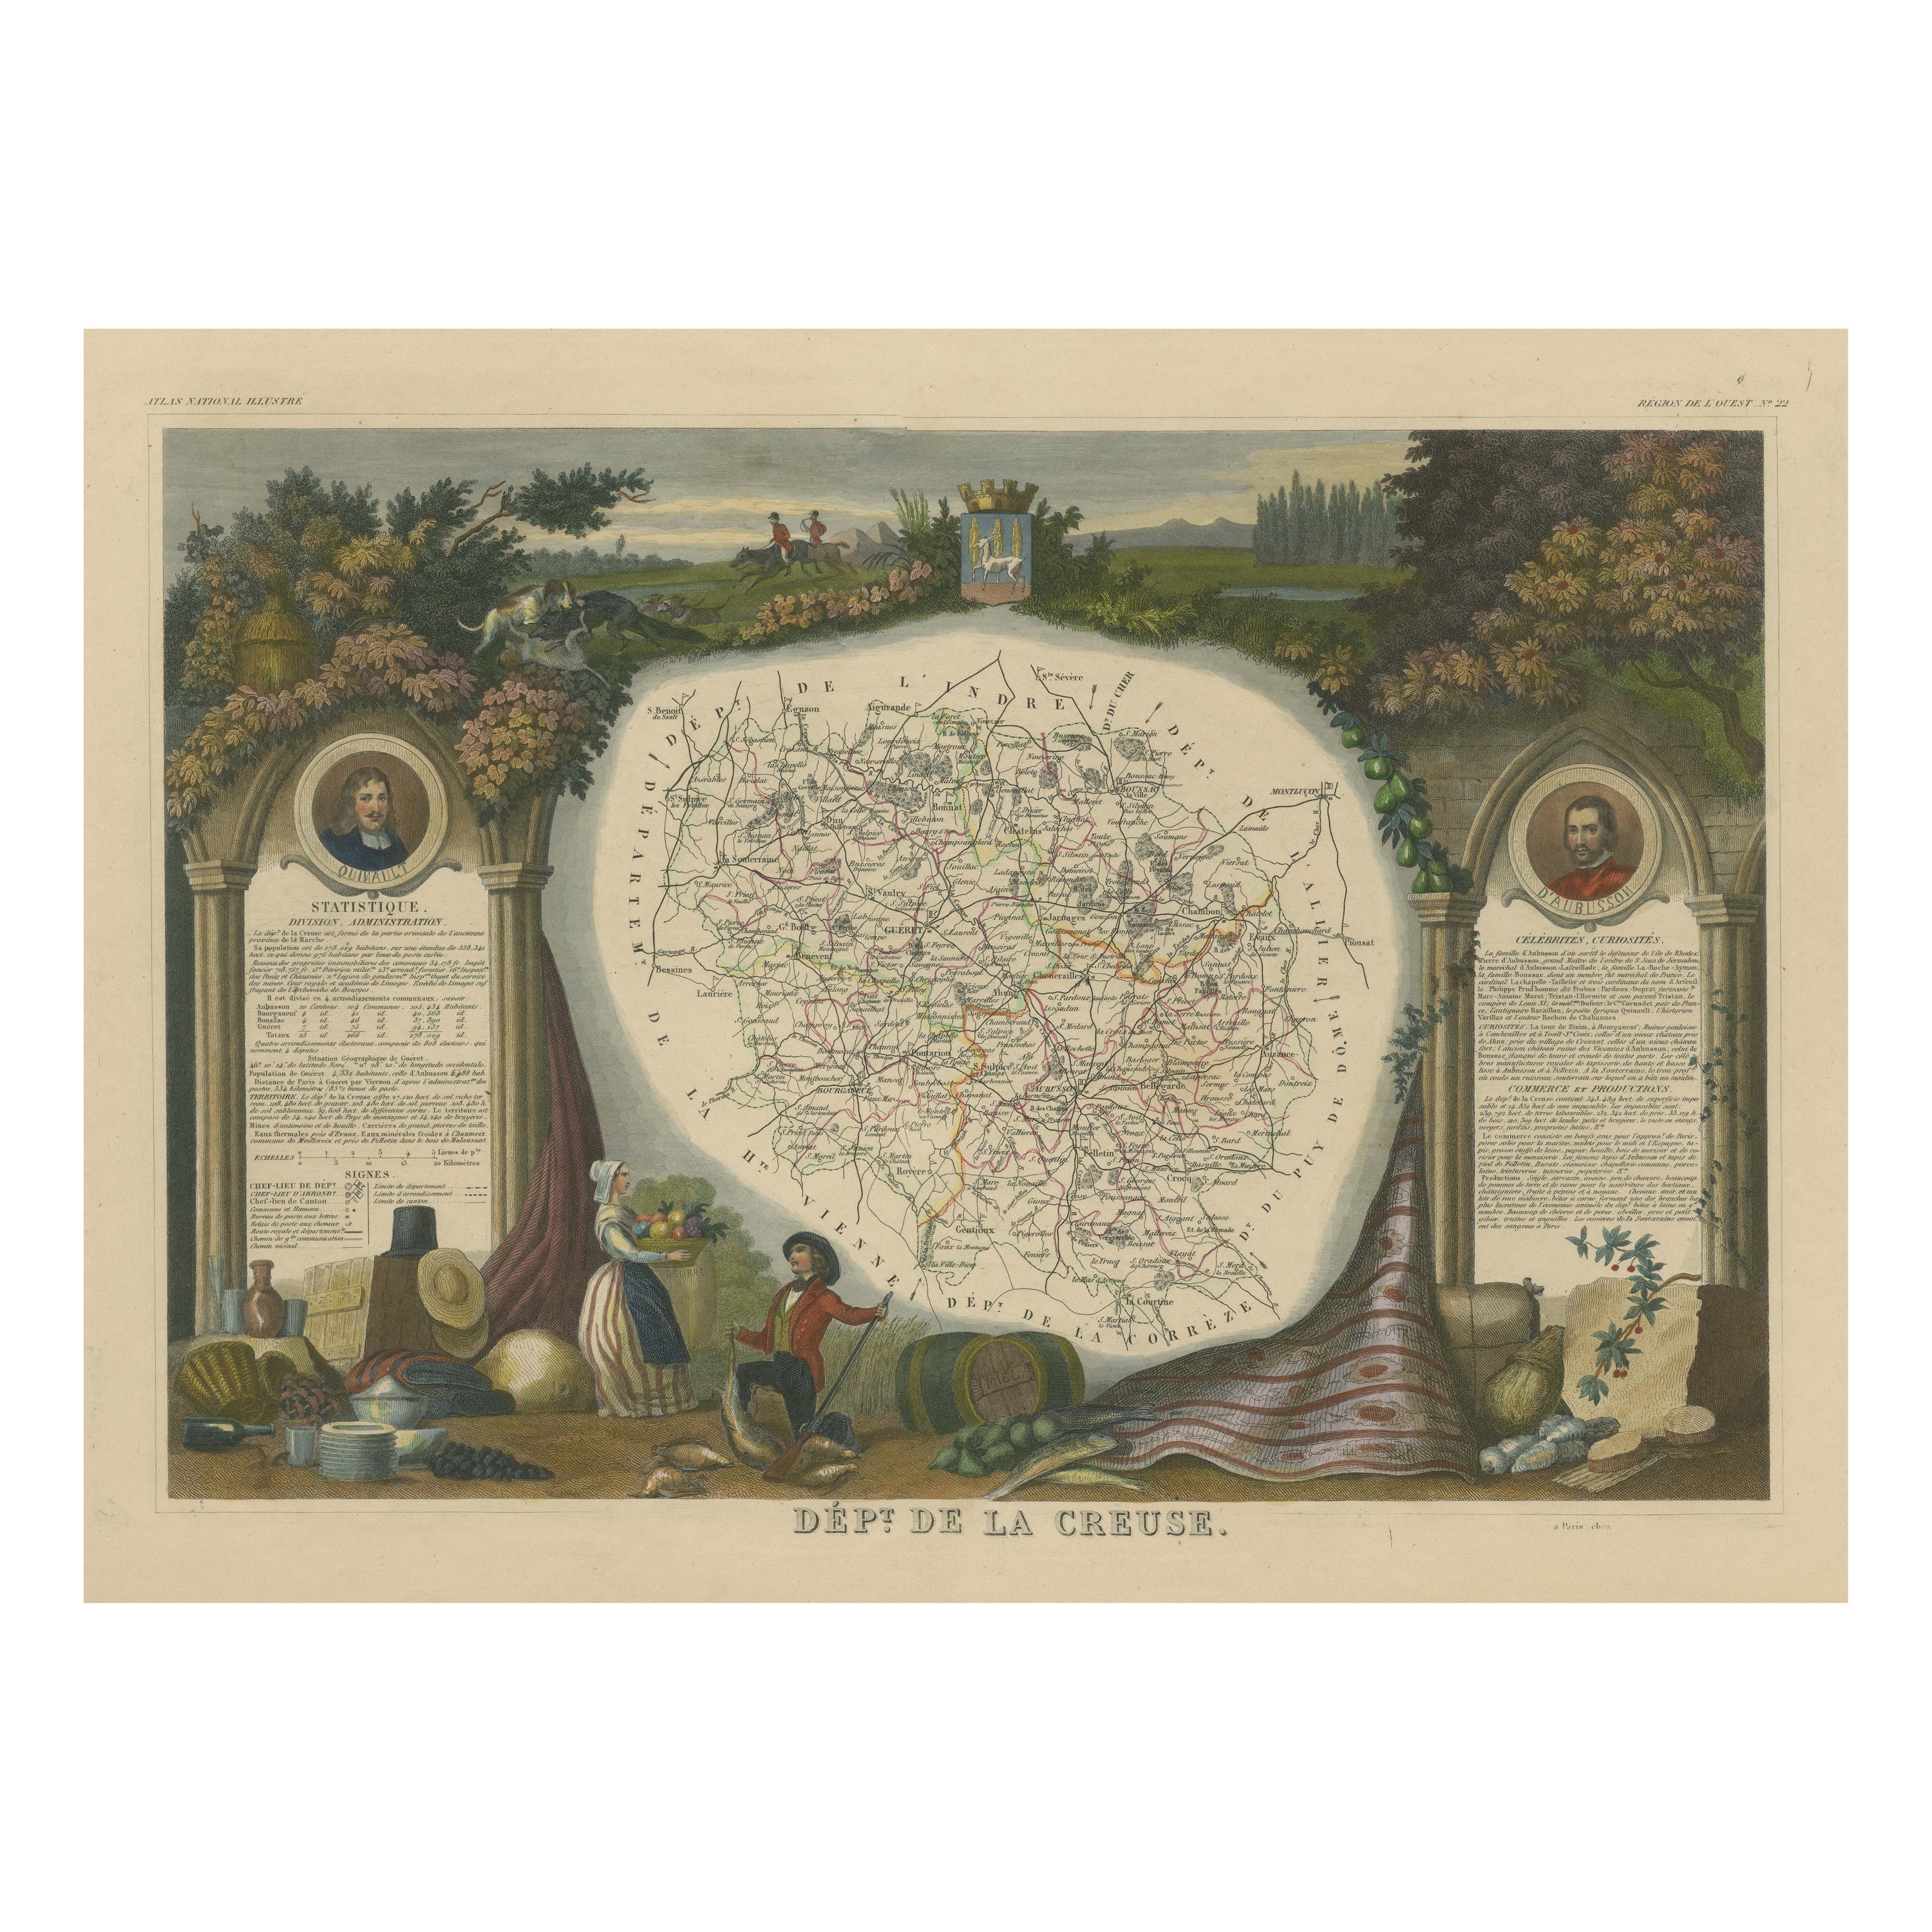 Hand Colored Antique Map of the Department of Creuse, France